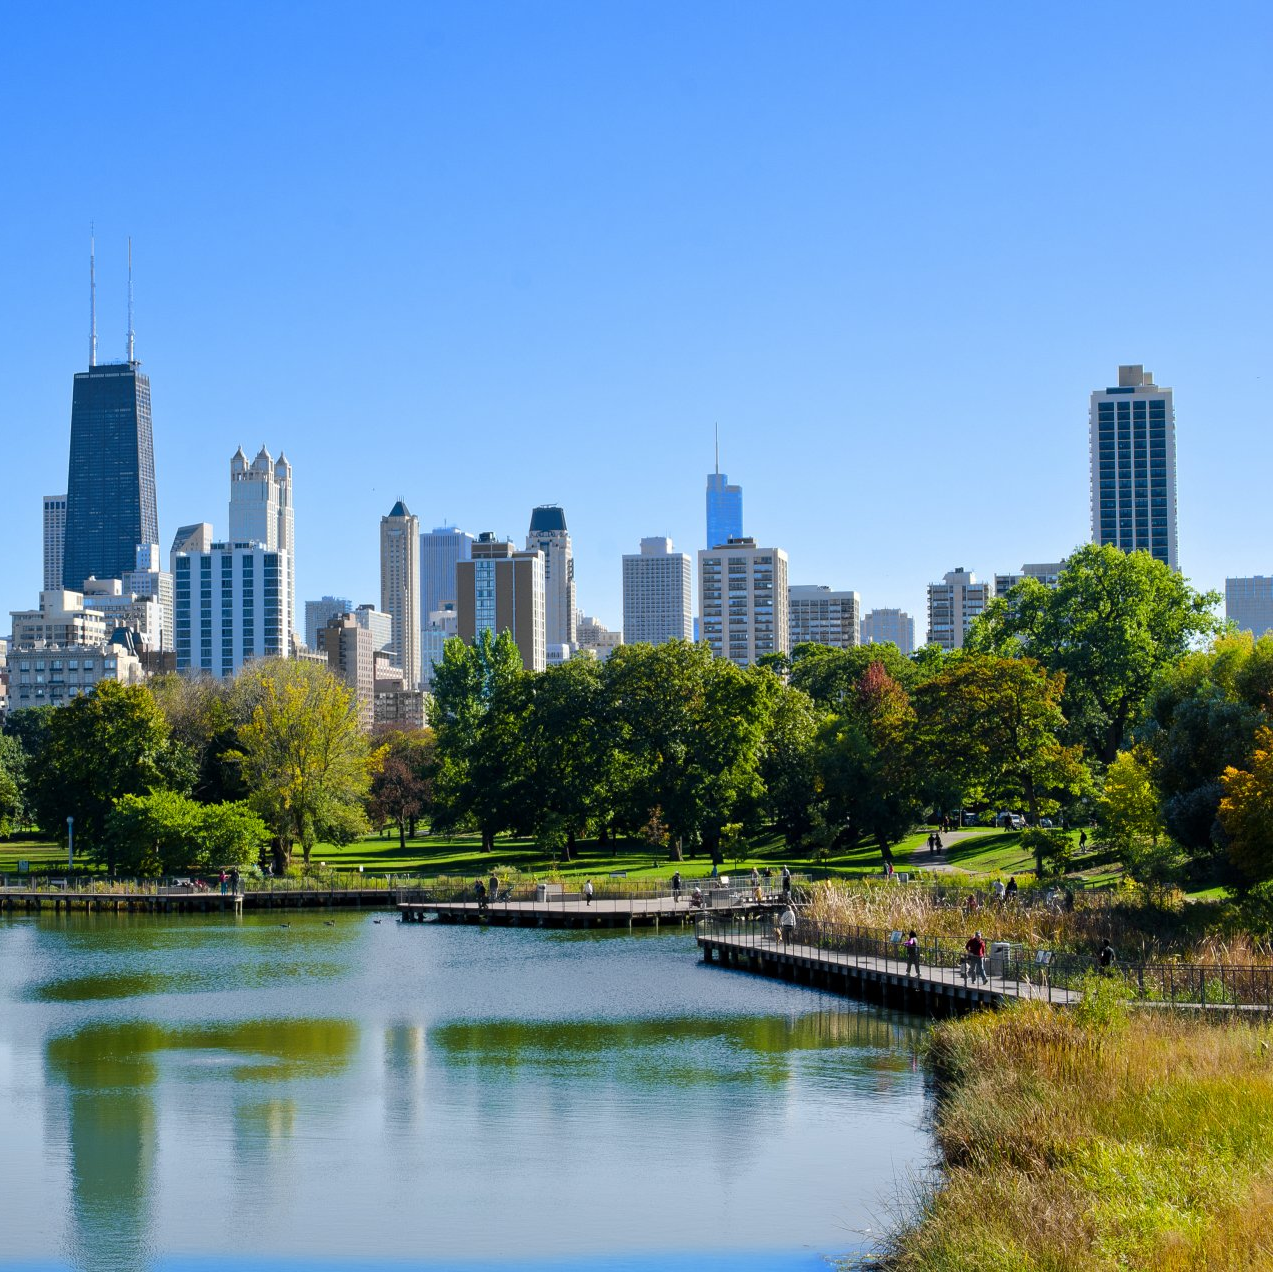 Photograph of the Chicago skyline as viewed from Lincoln Park